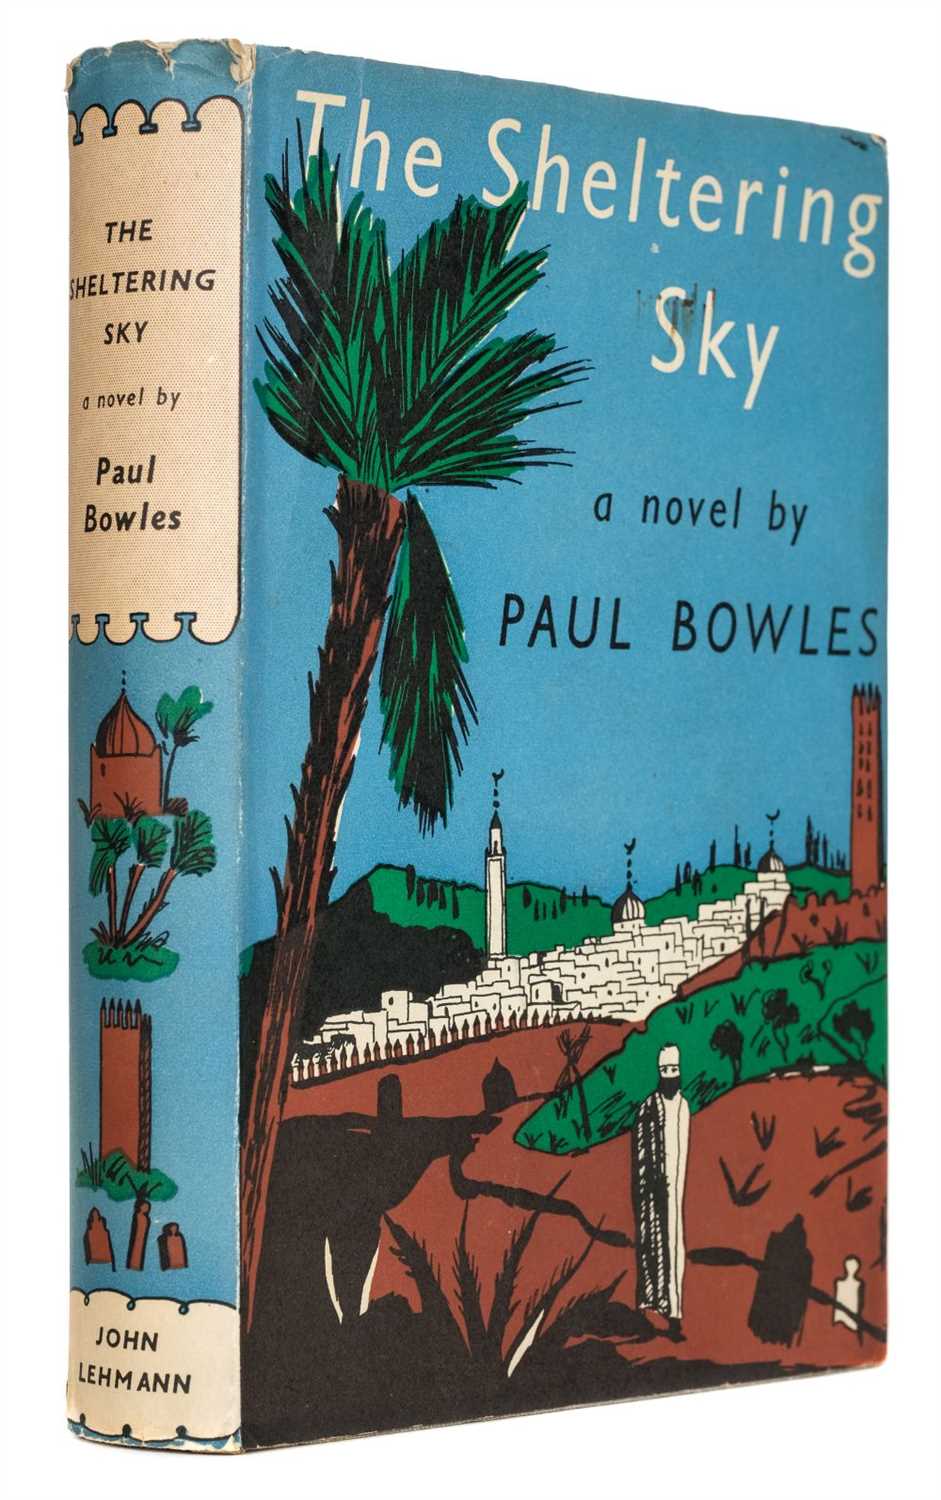 Lot 648 - Bowles (Paul). The Sheltering Sky, 1949